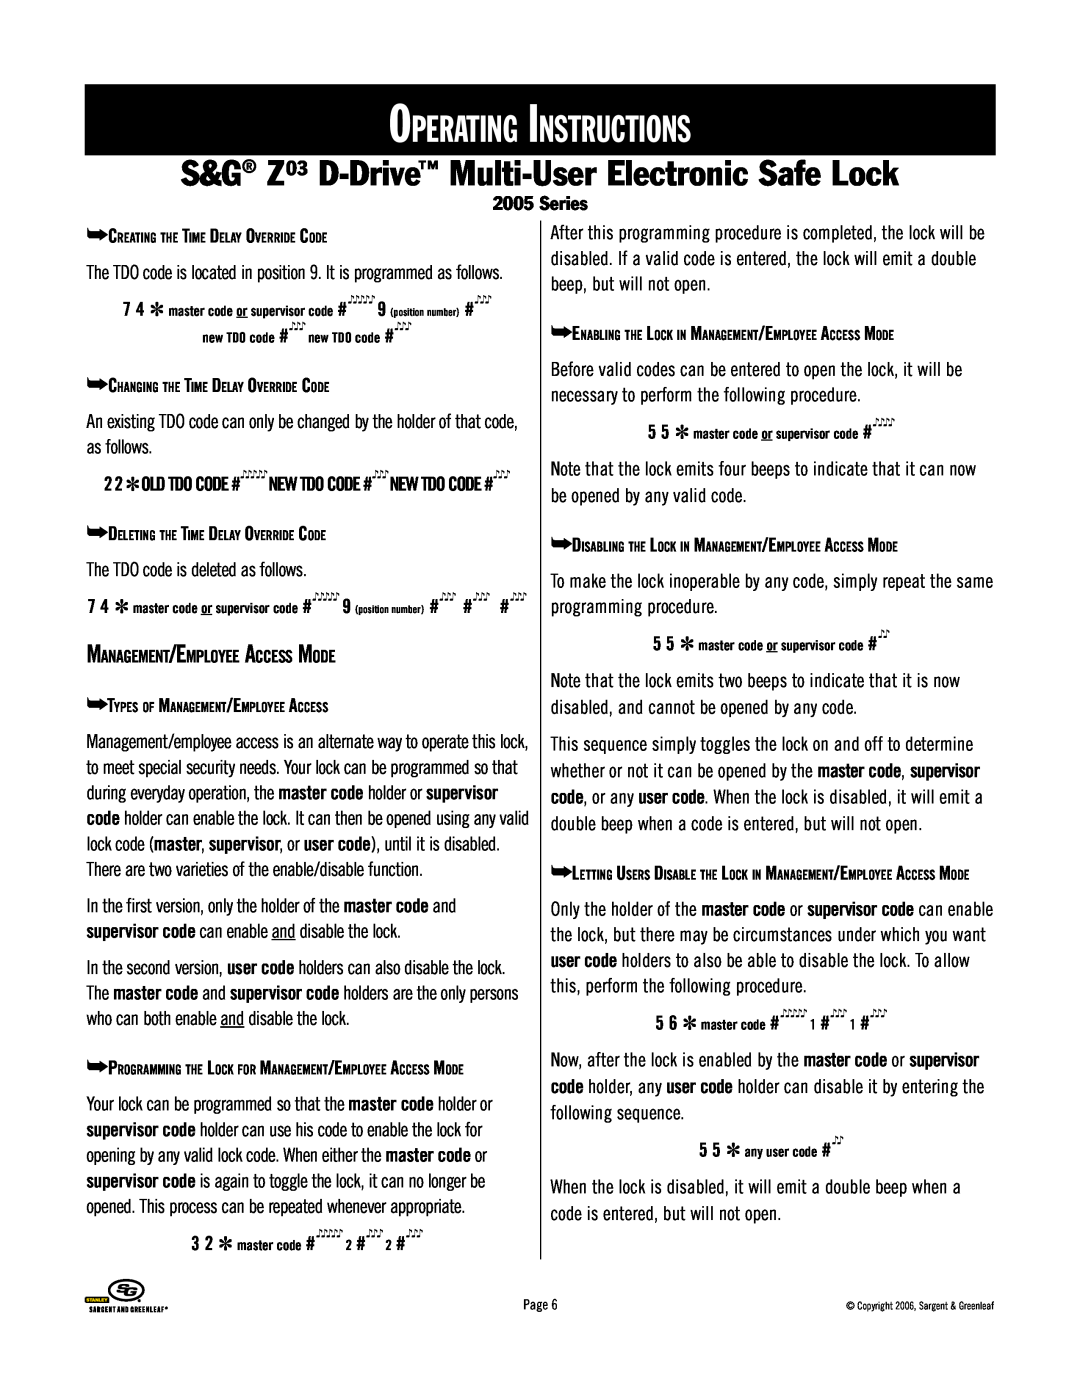 Stanley Black & Decker 2005 Series manual Operating Instructions, S&G Z03 D-Drive Multi-UserElectronic Safe Lock 